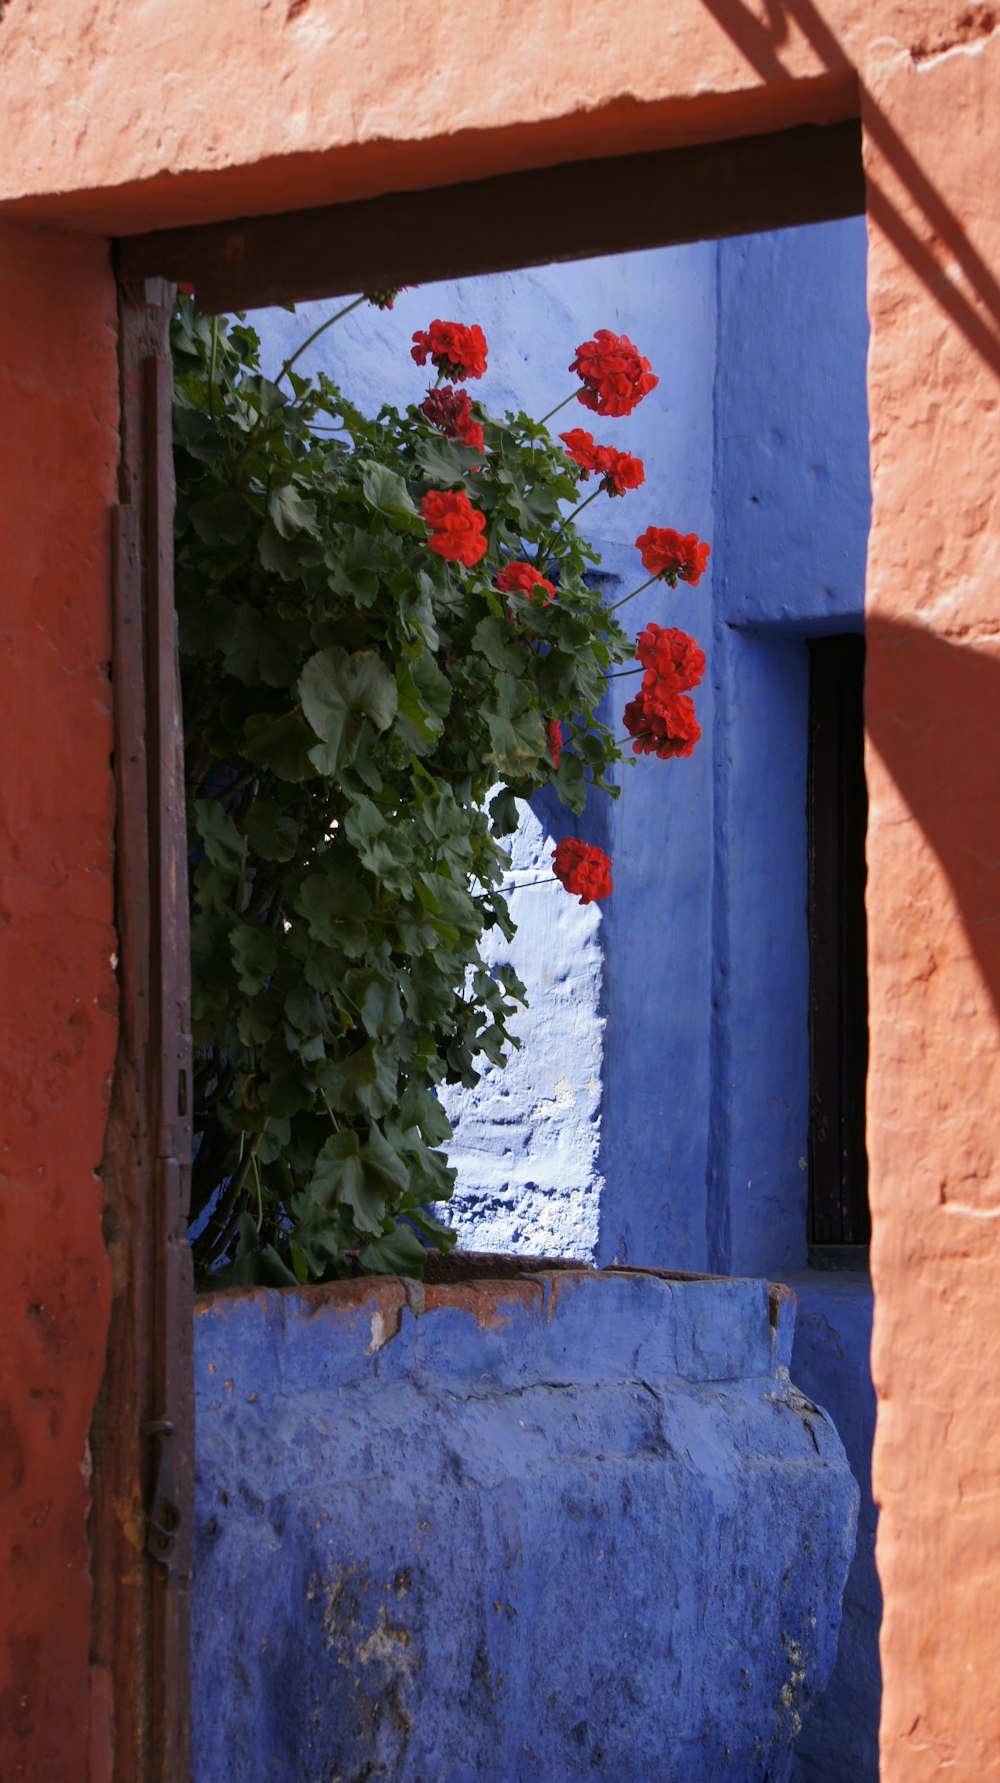 red flowers are growing out of a blue window